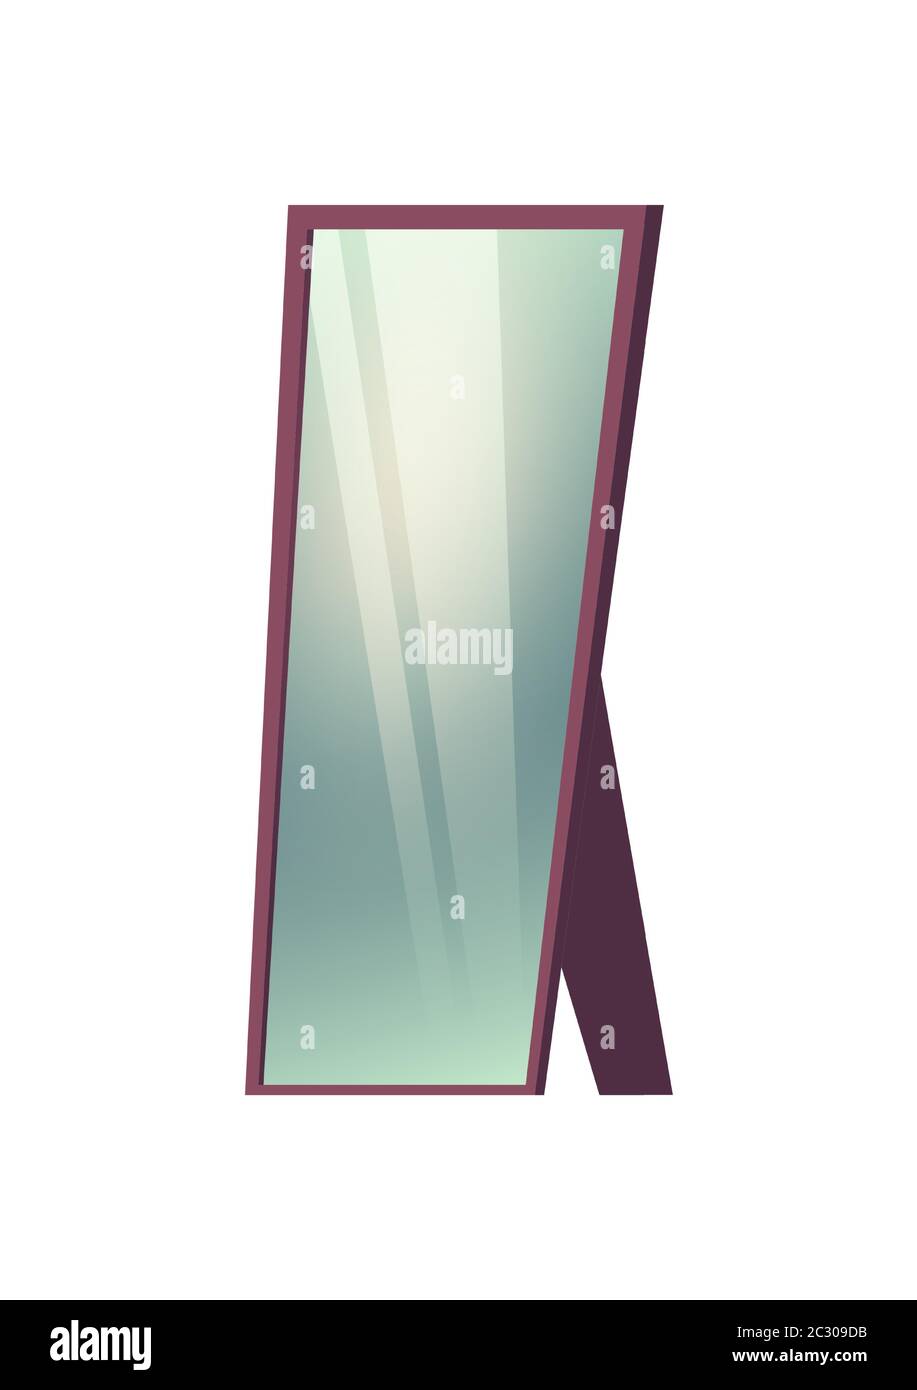 Standing floor mirror isolated on white background. Vector cartoon illustration of full length rectrangle mirror with purple frame and glass surface f Stock Vector